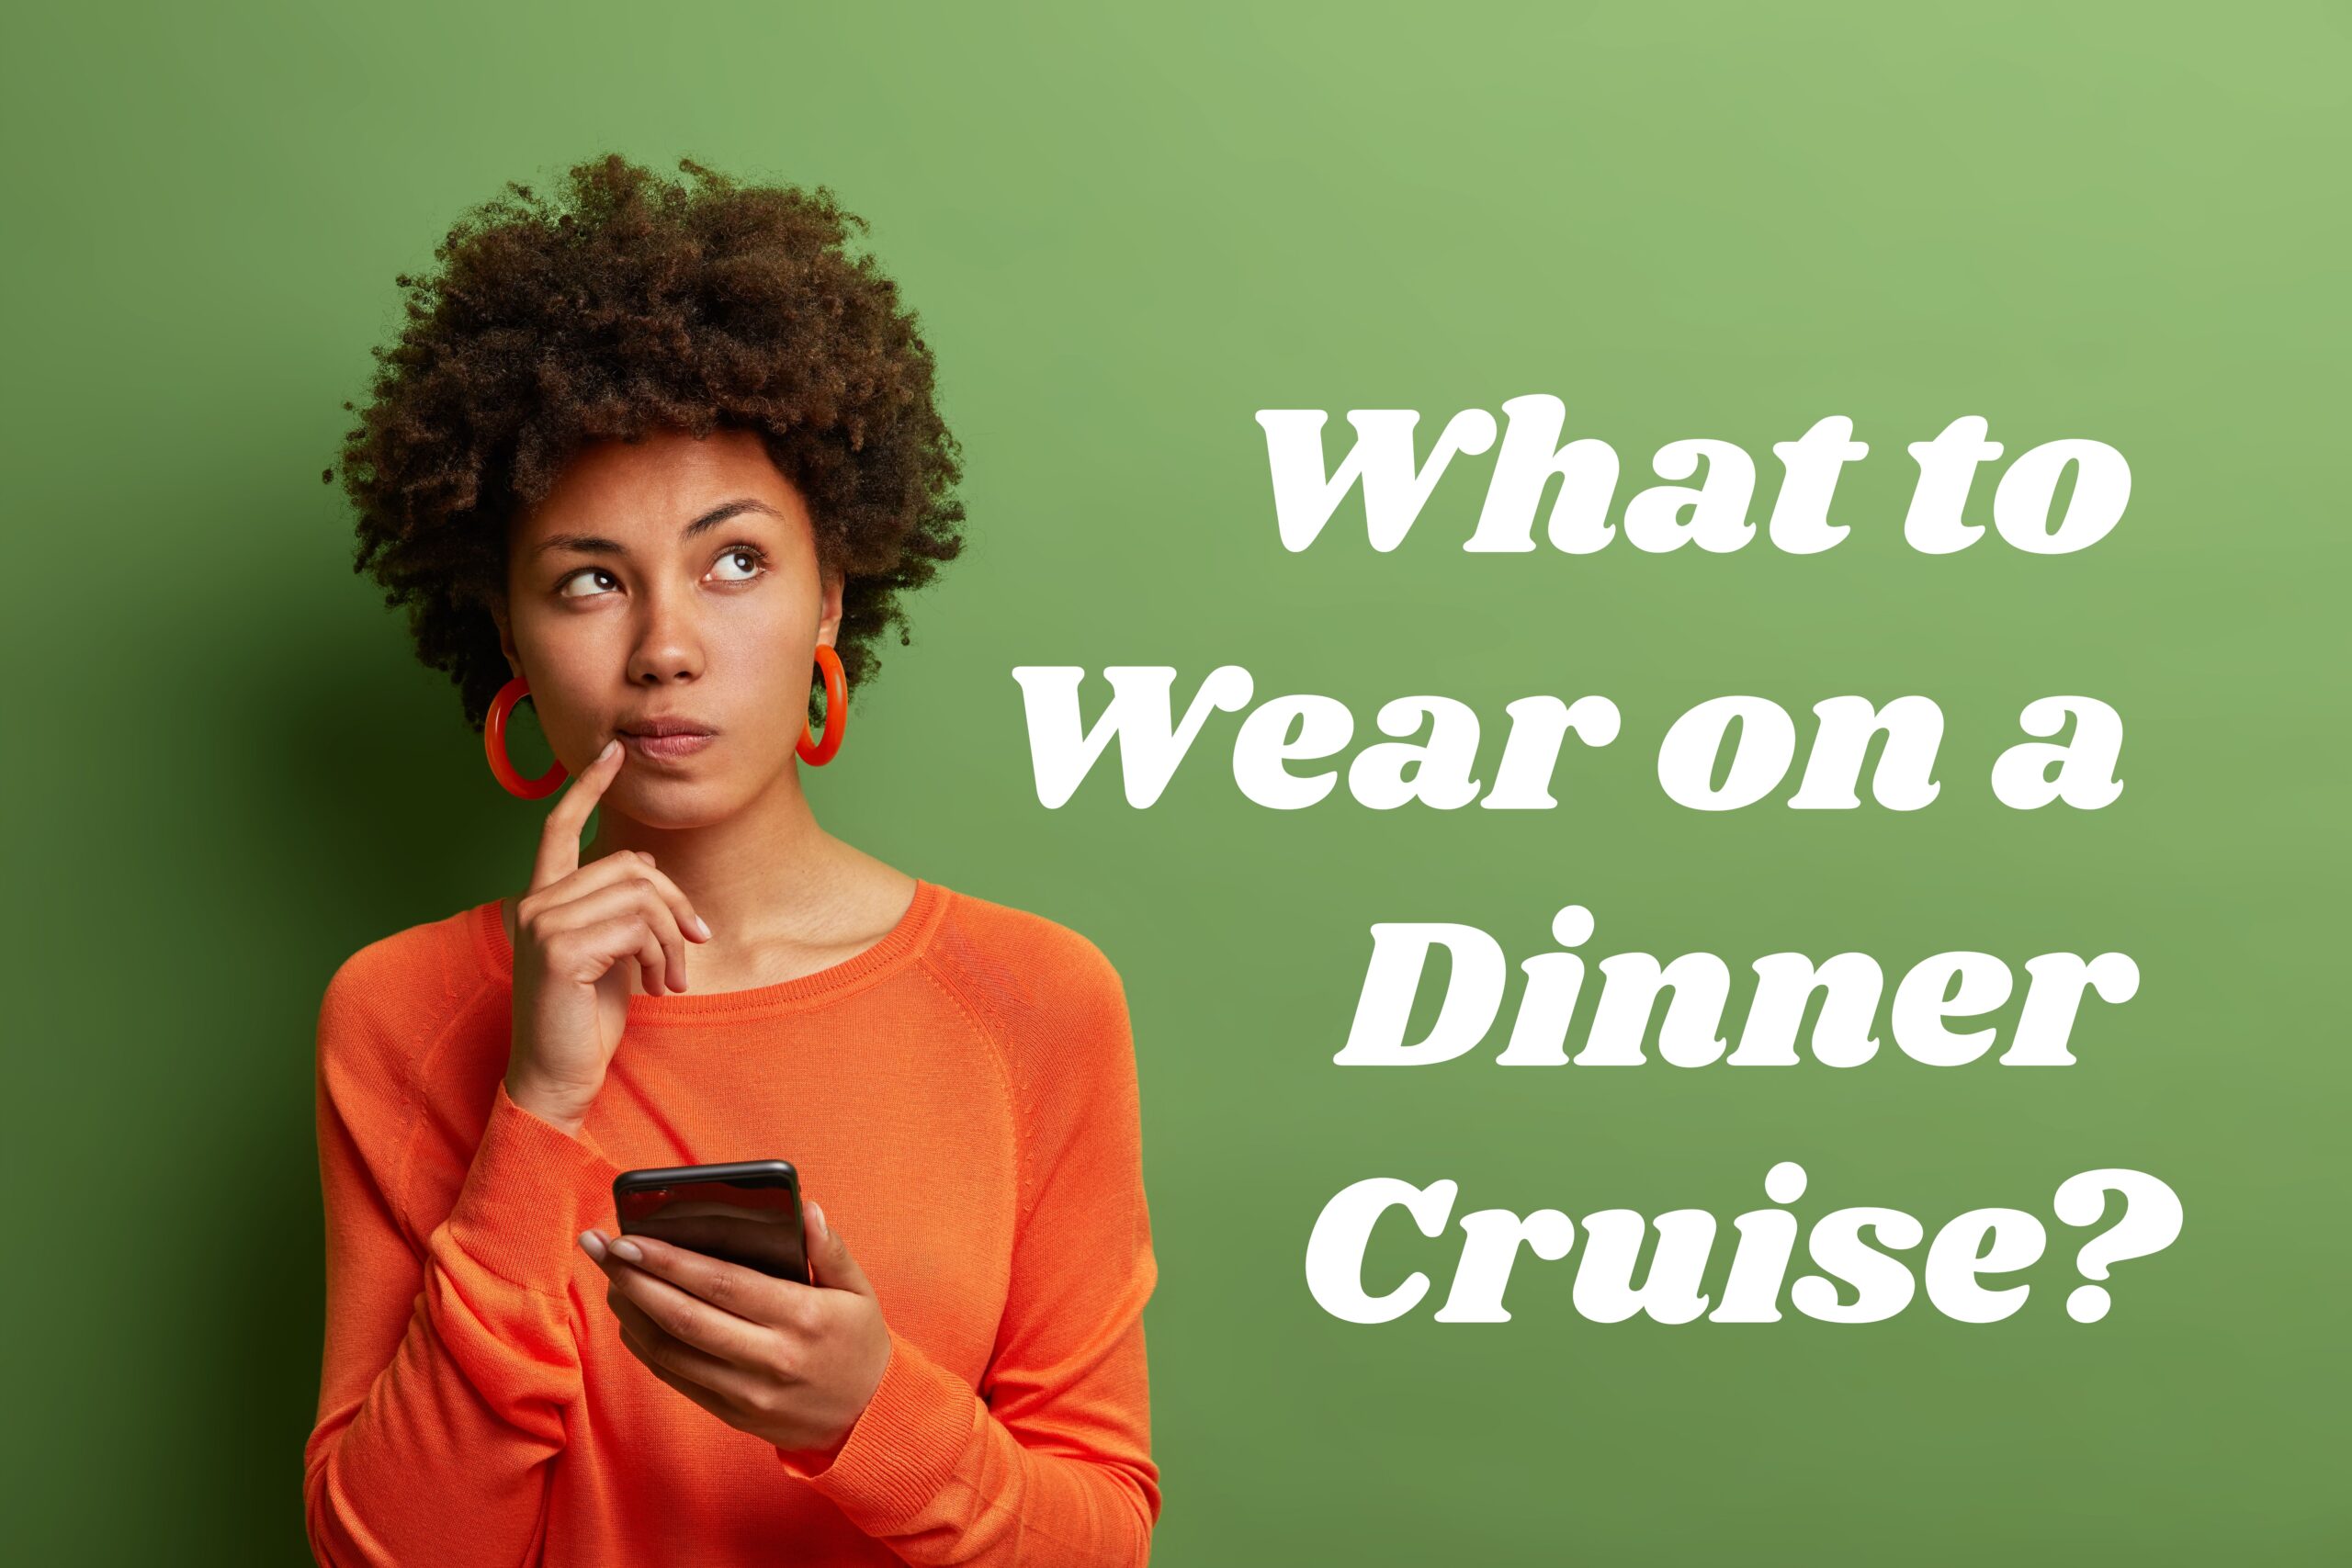 What to Wear on a Dinner Cruise